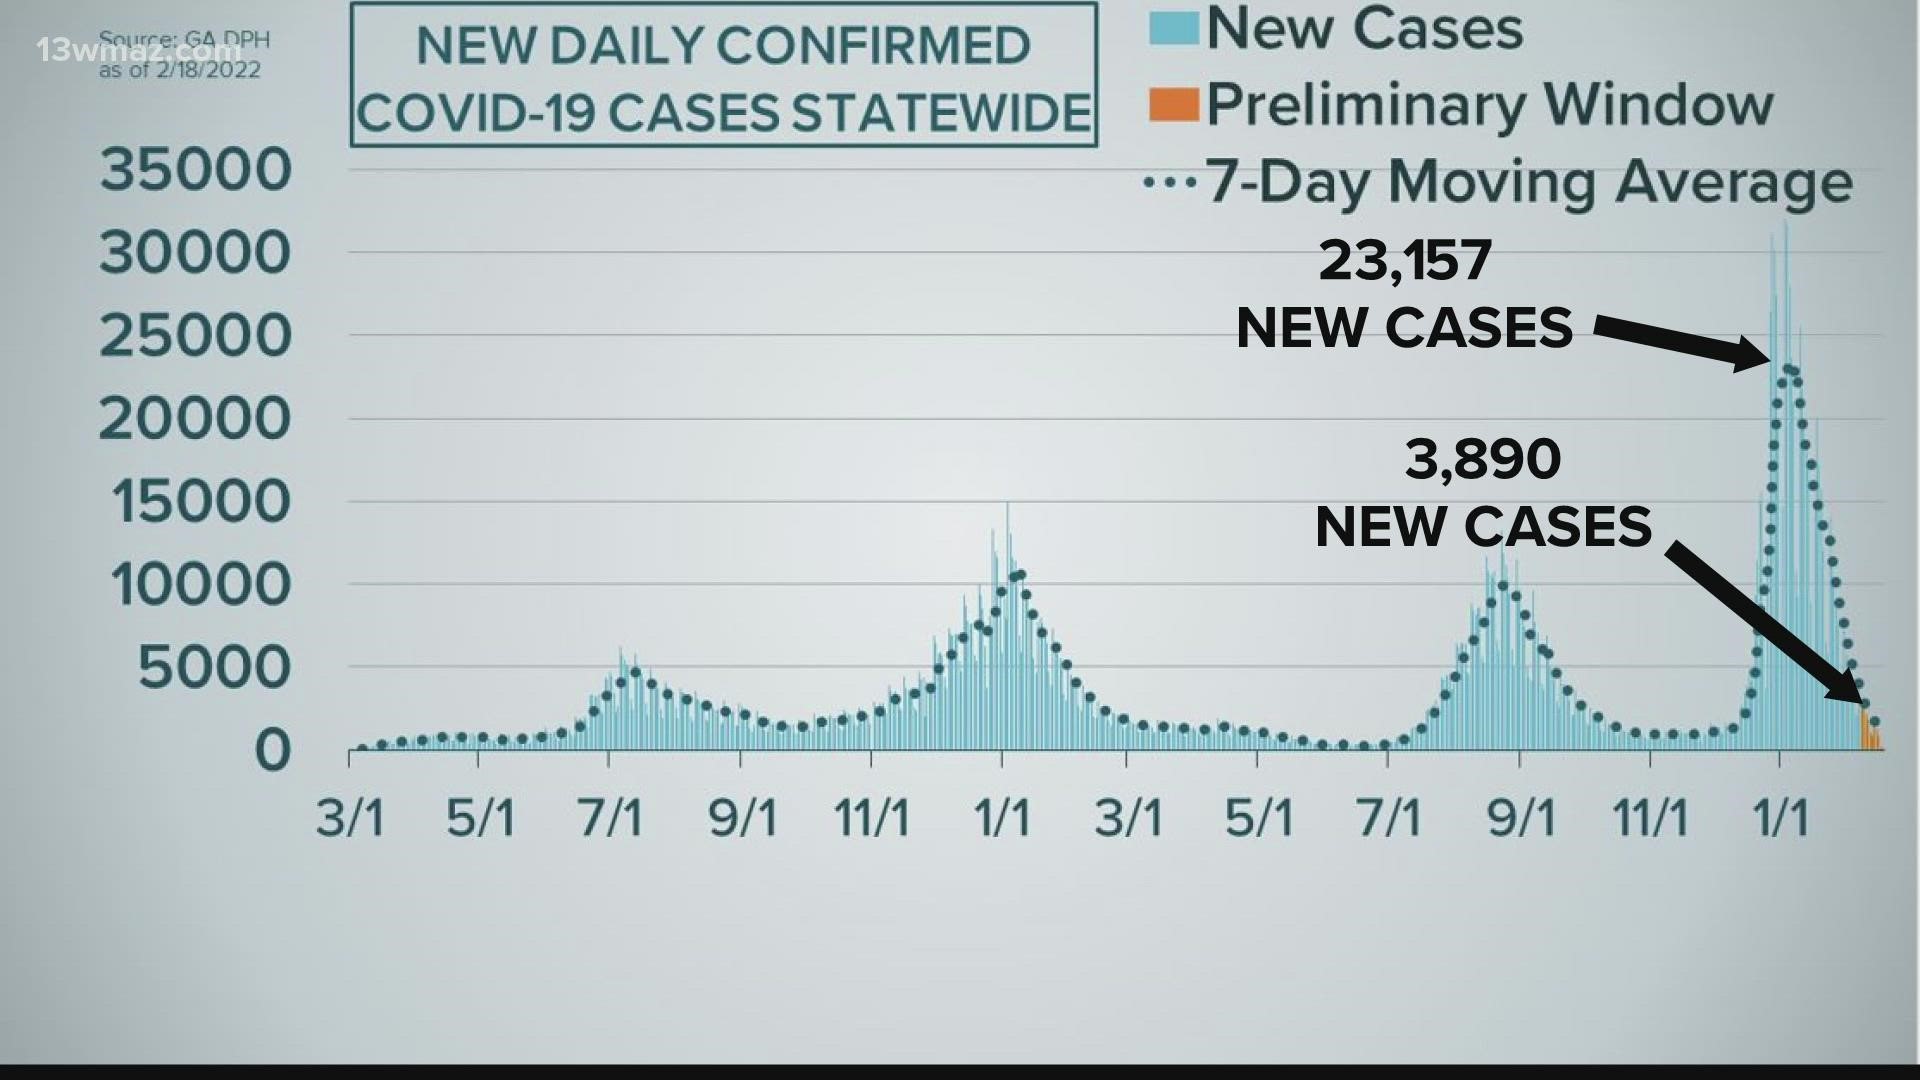 Average daily case counts fell by nearly 20,000 in the last month.